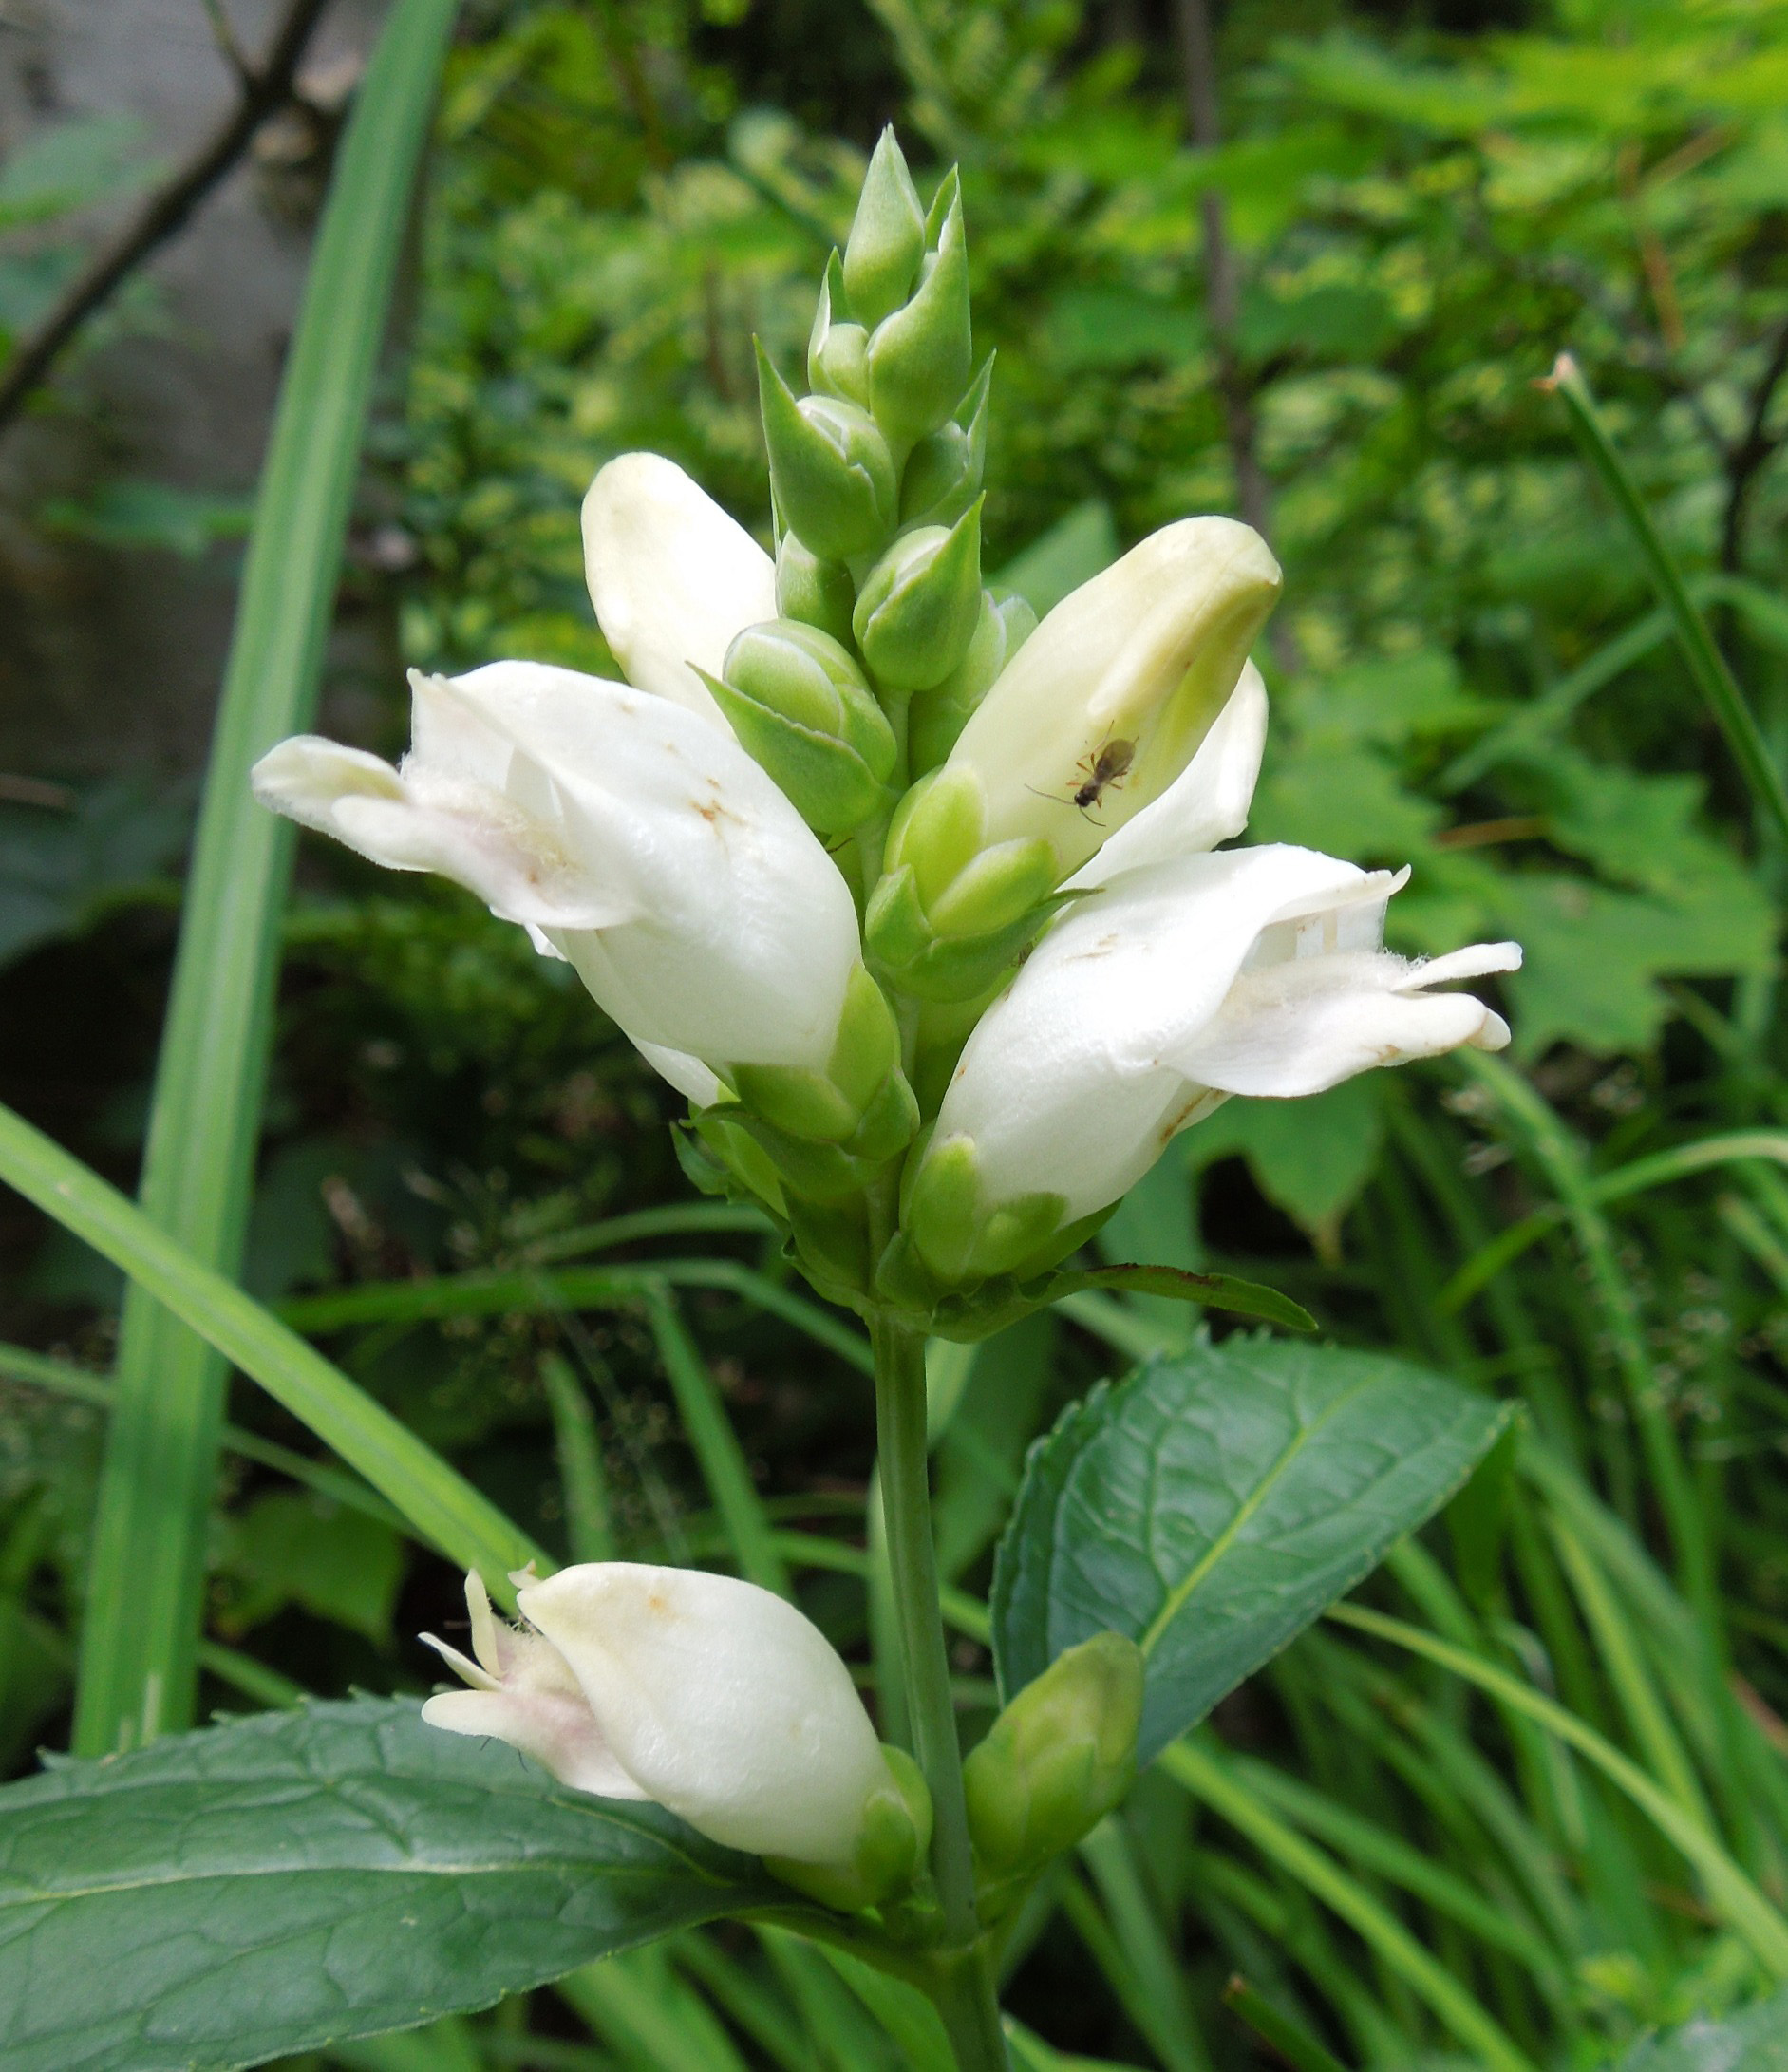 White Turtlehead is named for its distinctive flowers which are said to resemble a turtle's head. This wetland plant will strongly prefer wet to moist soils in full to mostly sun. The blooms are pollinated mostly by bumblebees, which have the size and strength to pry open the bloom and reach the nectar inside. White Turtlehead is a preferred host plant for the beautiful Baltimore Checkerspot butterfly.